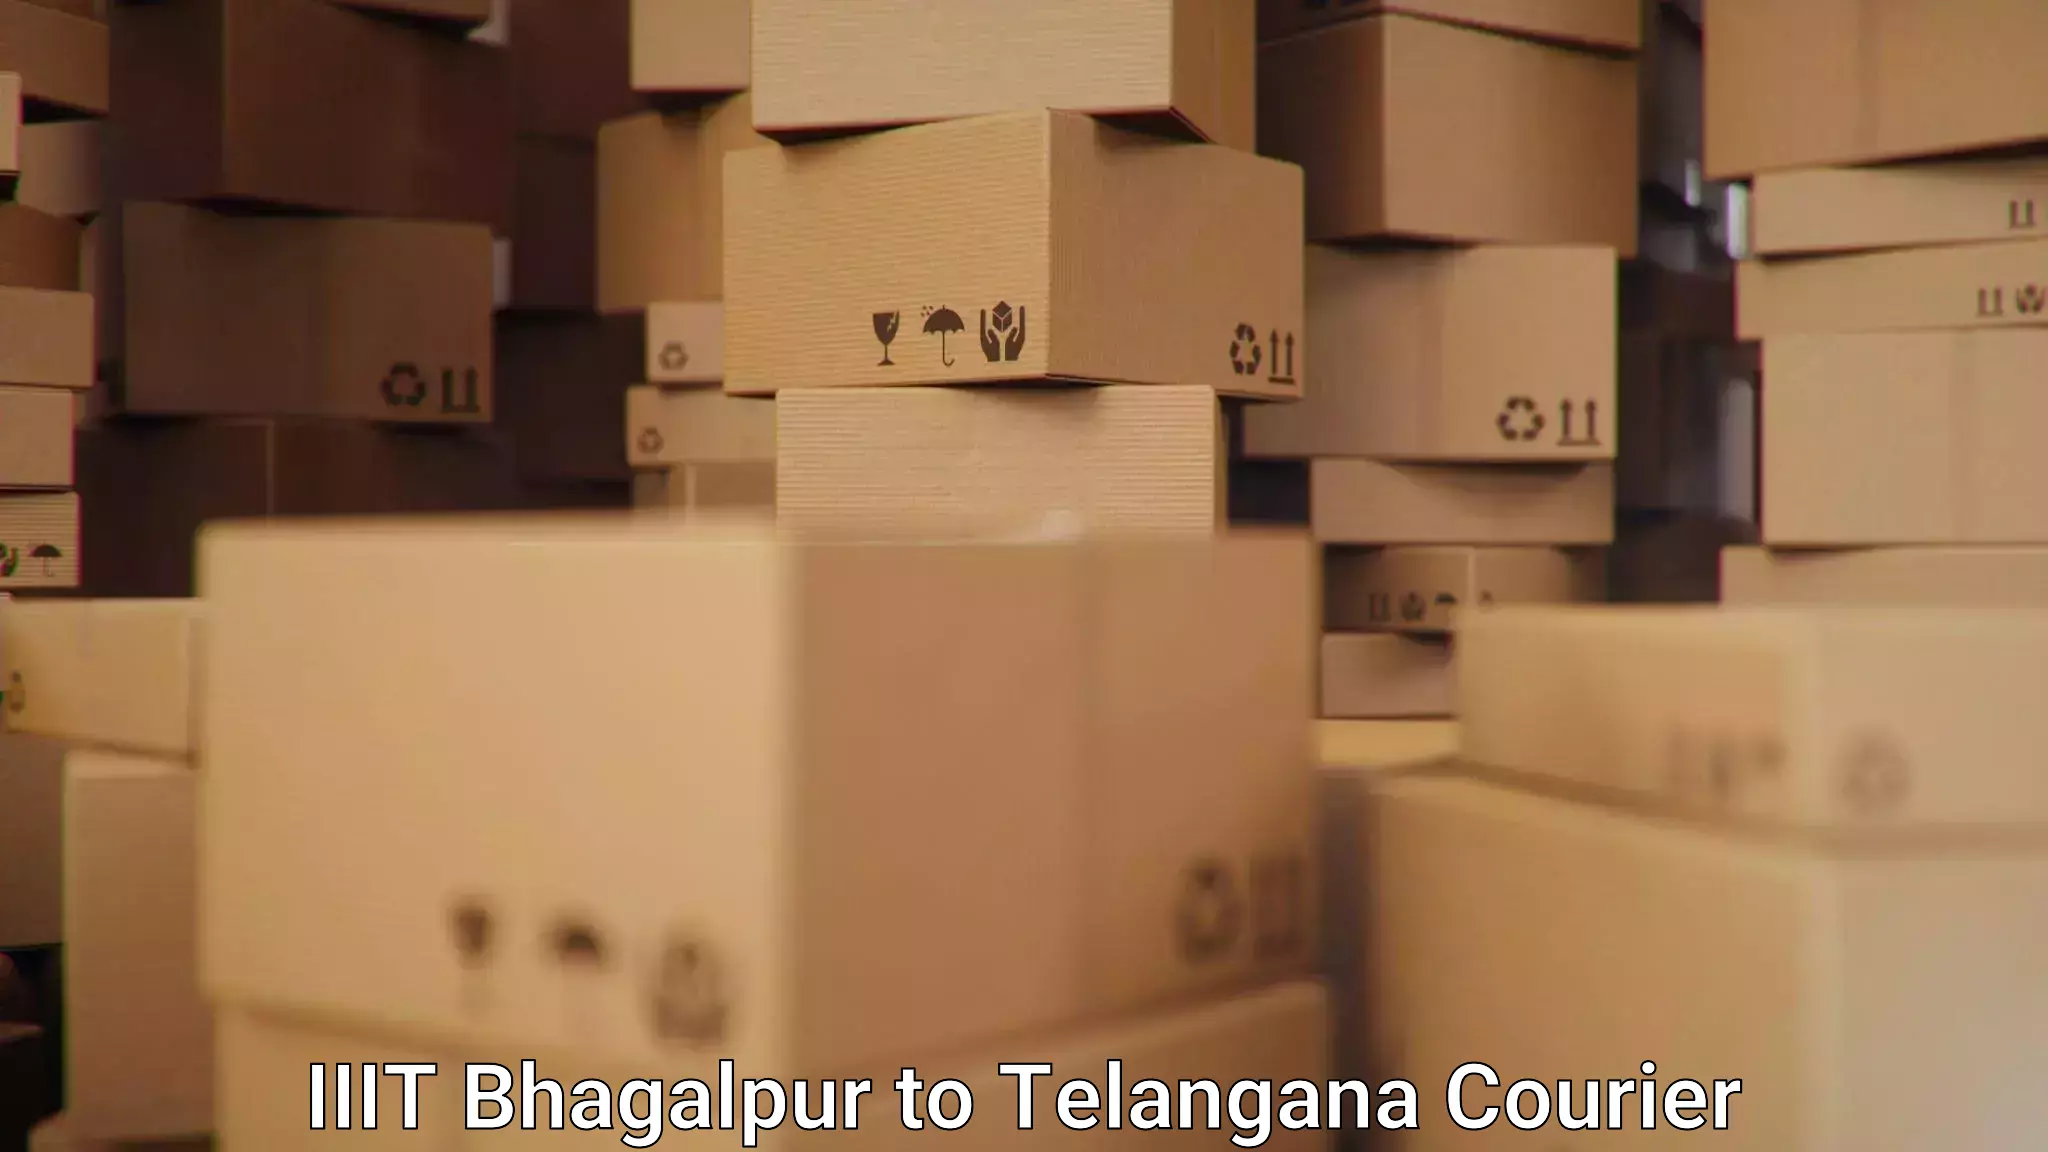 State-of-the-art courier technology IIIT Bhagalpur to Telangana